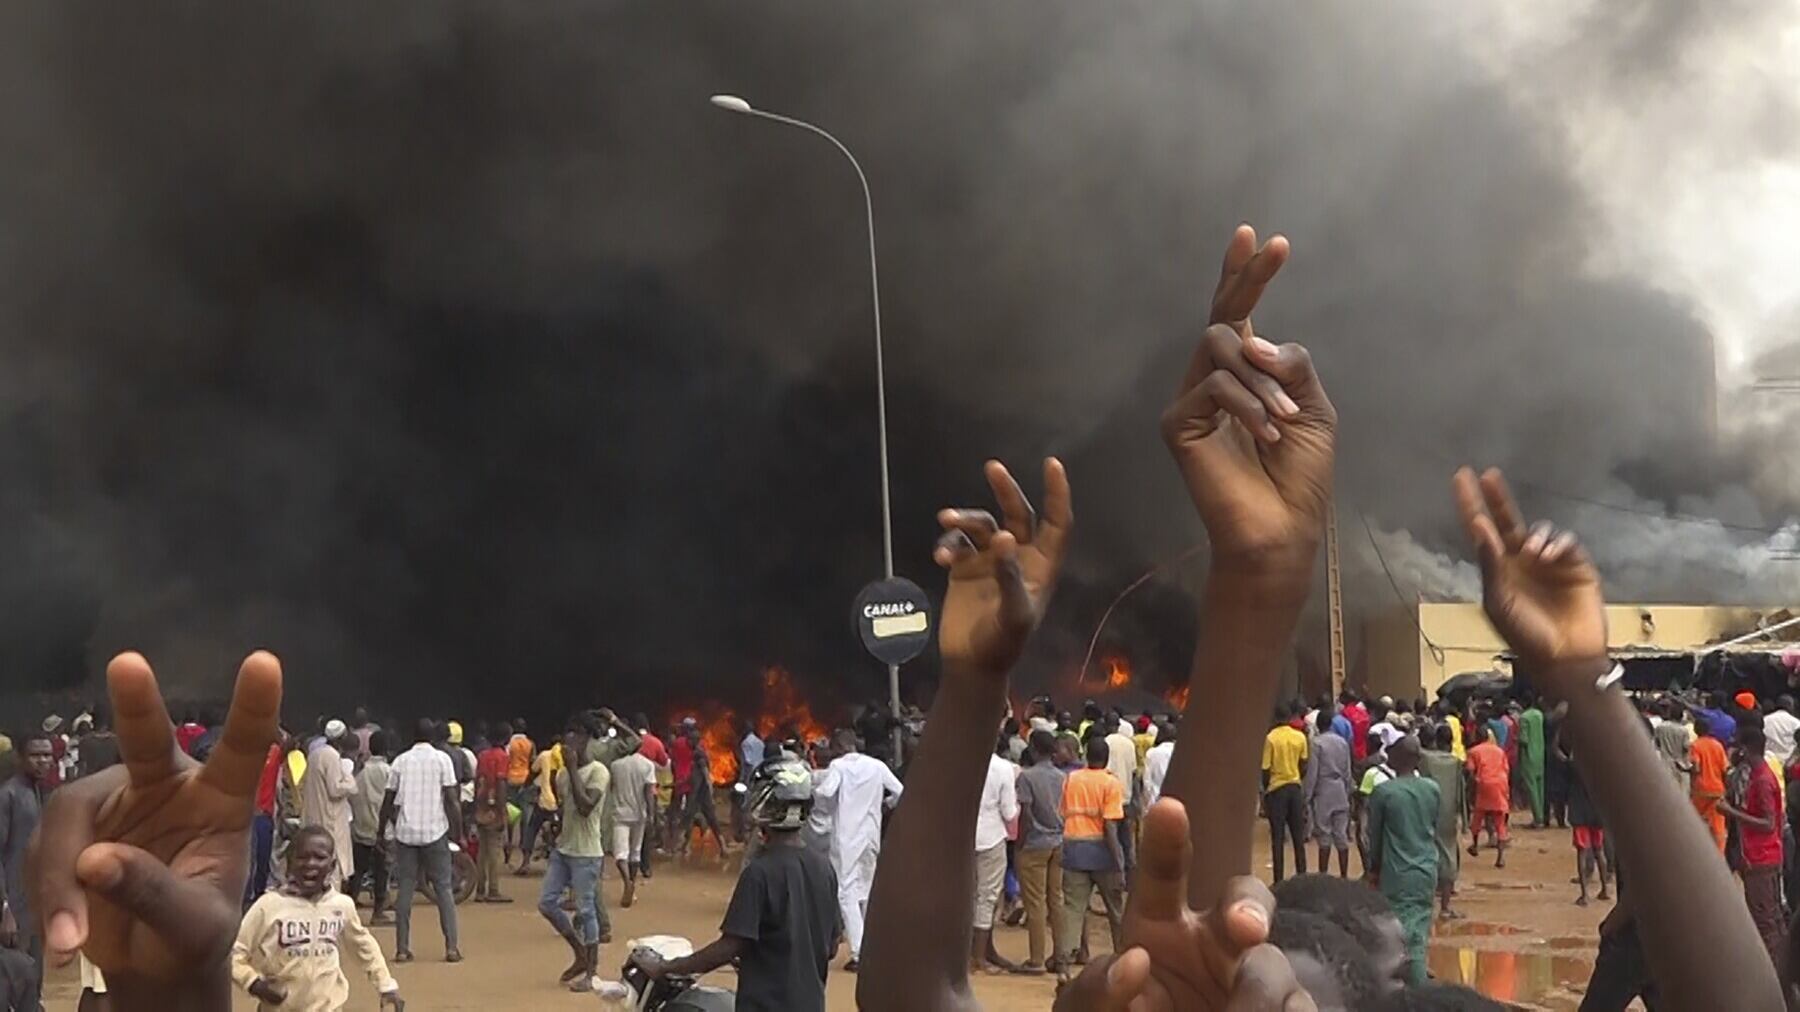 With the headquarters of the ruling party burning in the back, supporters of mutinous soldiers demonstrate in Niamey (Fatahoulaye Hassane Midou/AP)